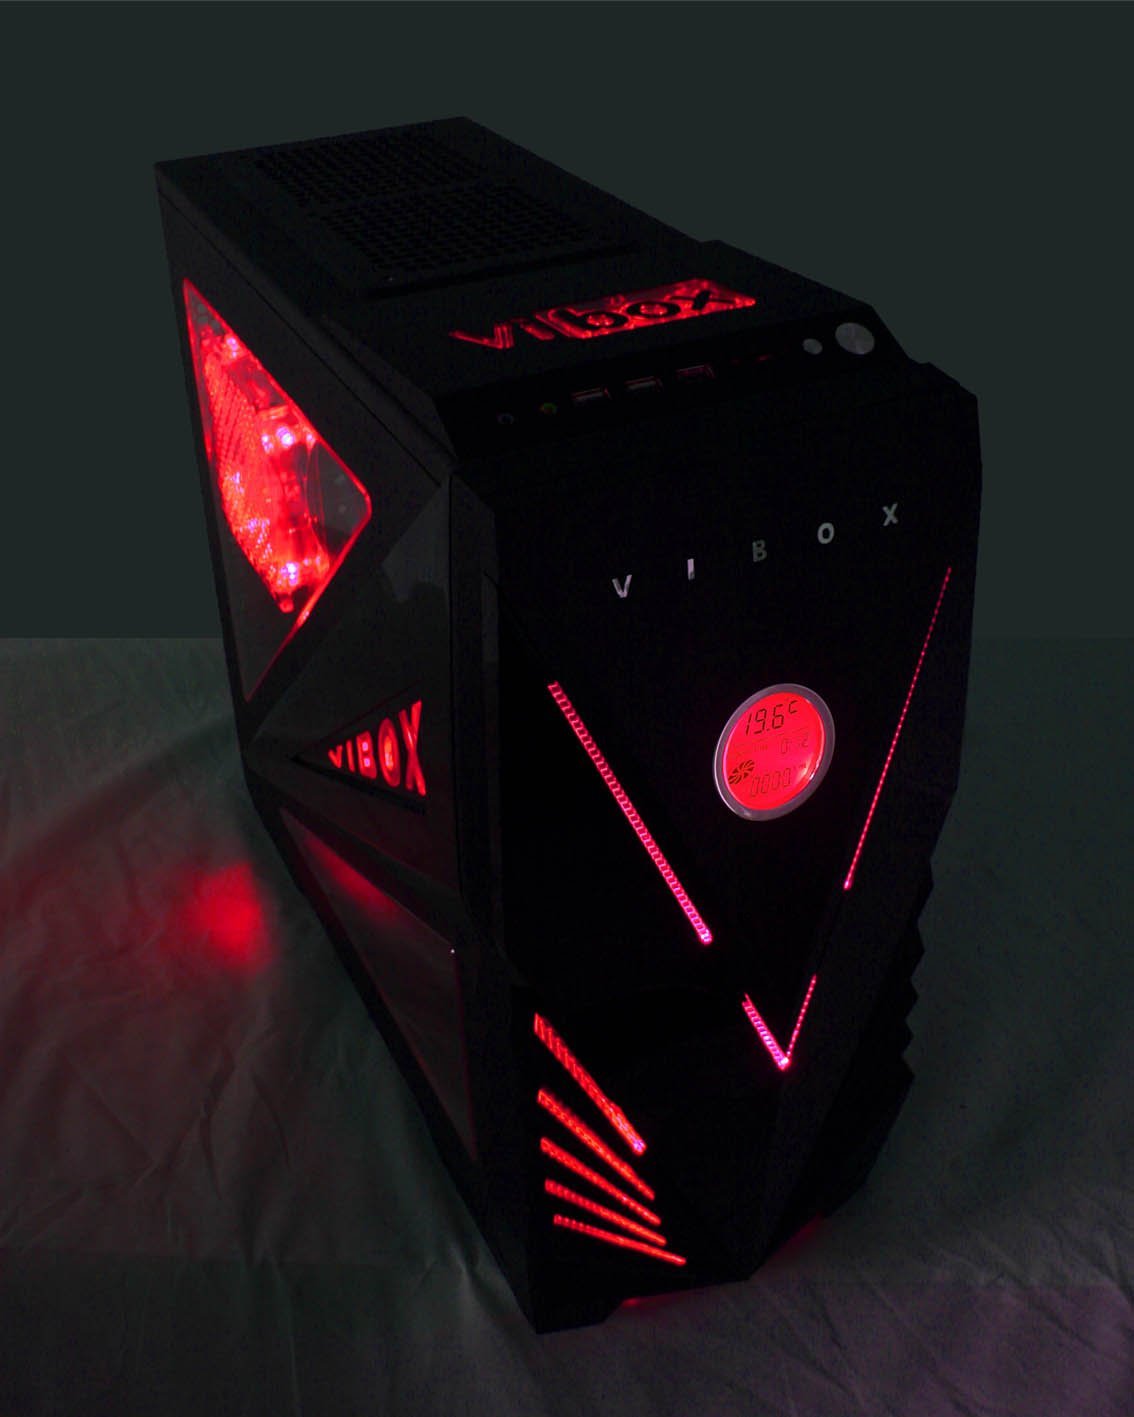 Vibox Defcon 3 Red Gaming PC Review